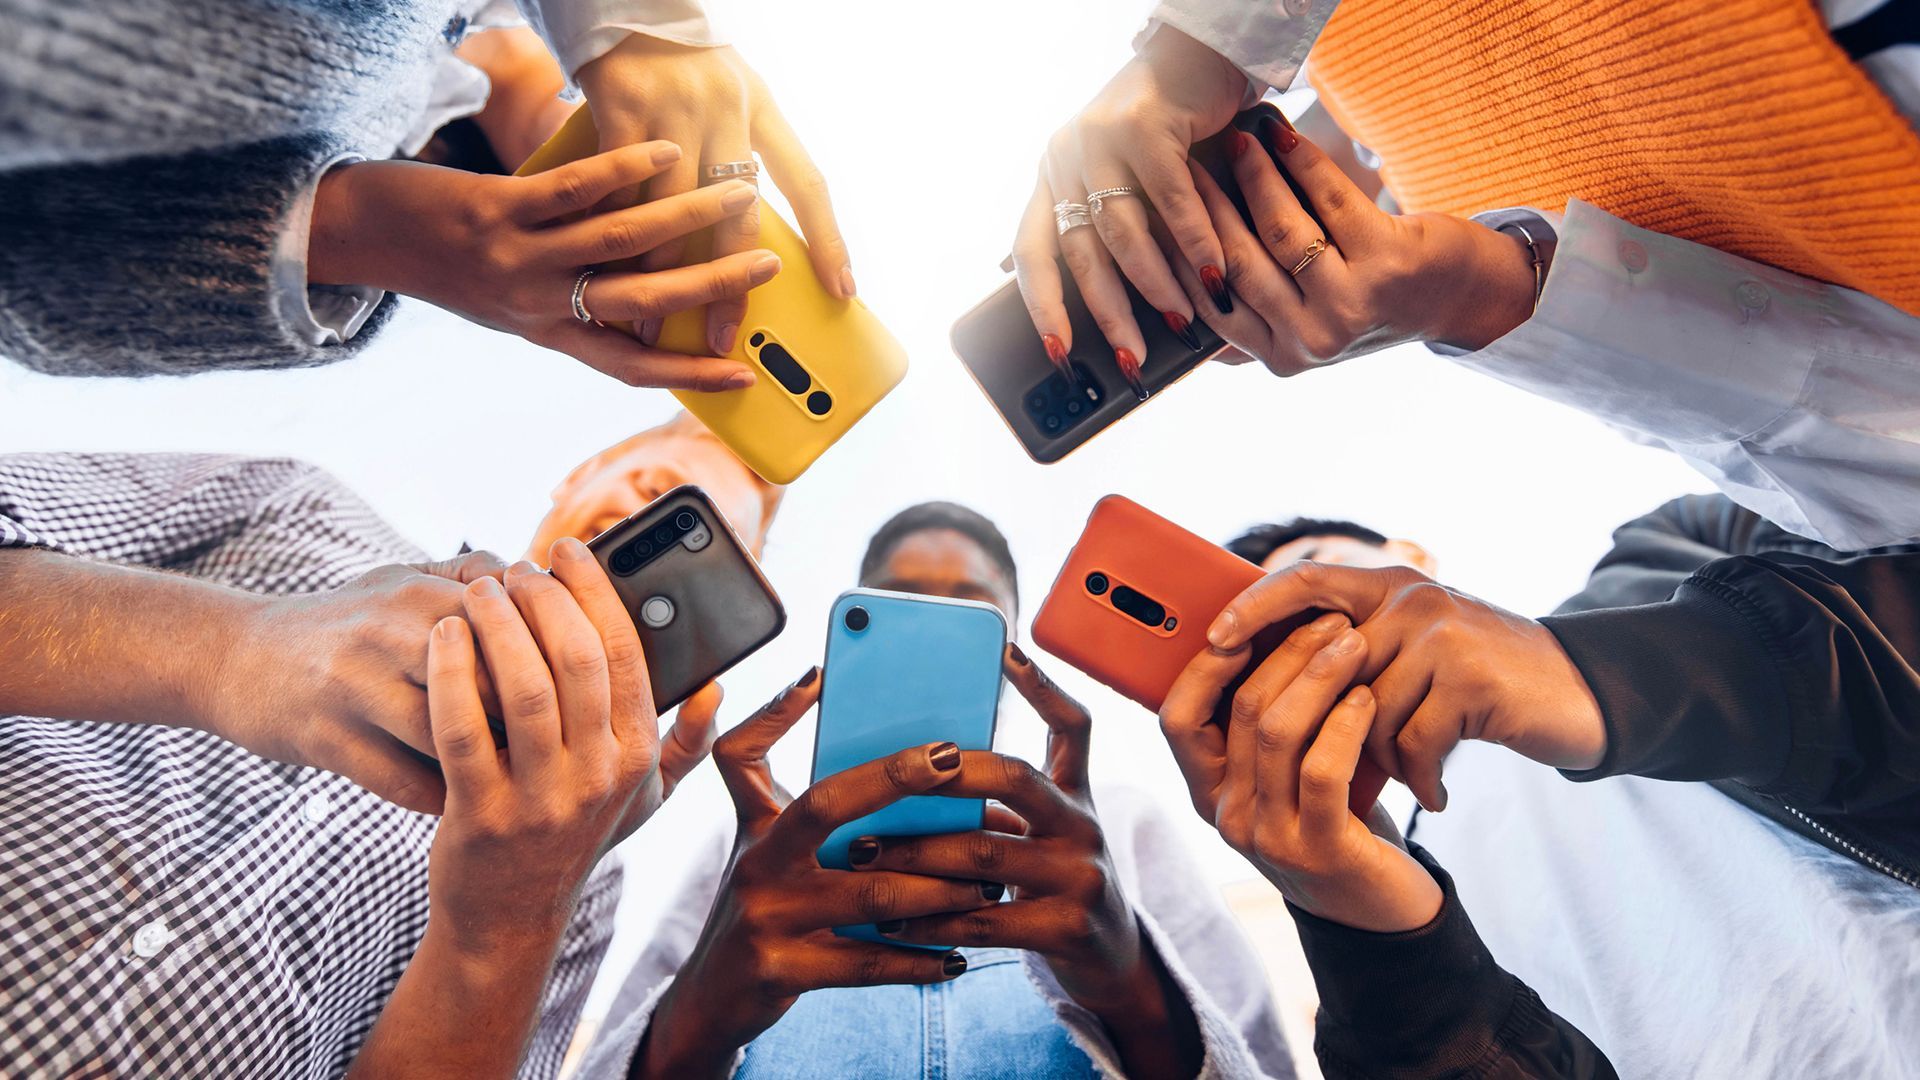 A group of people are looking at their mobile phones